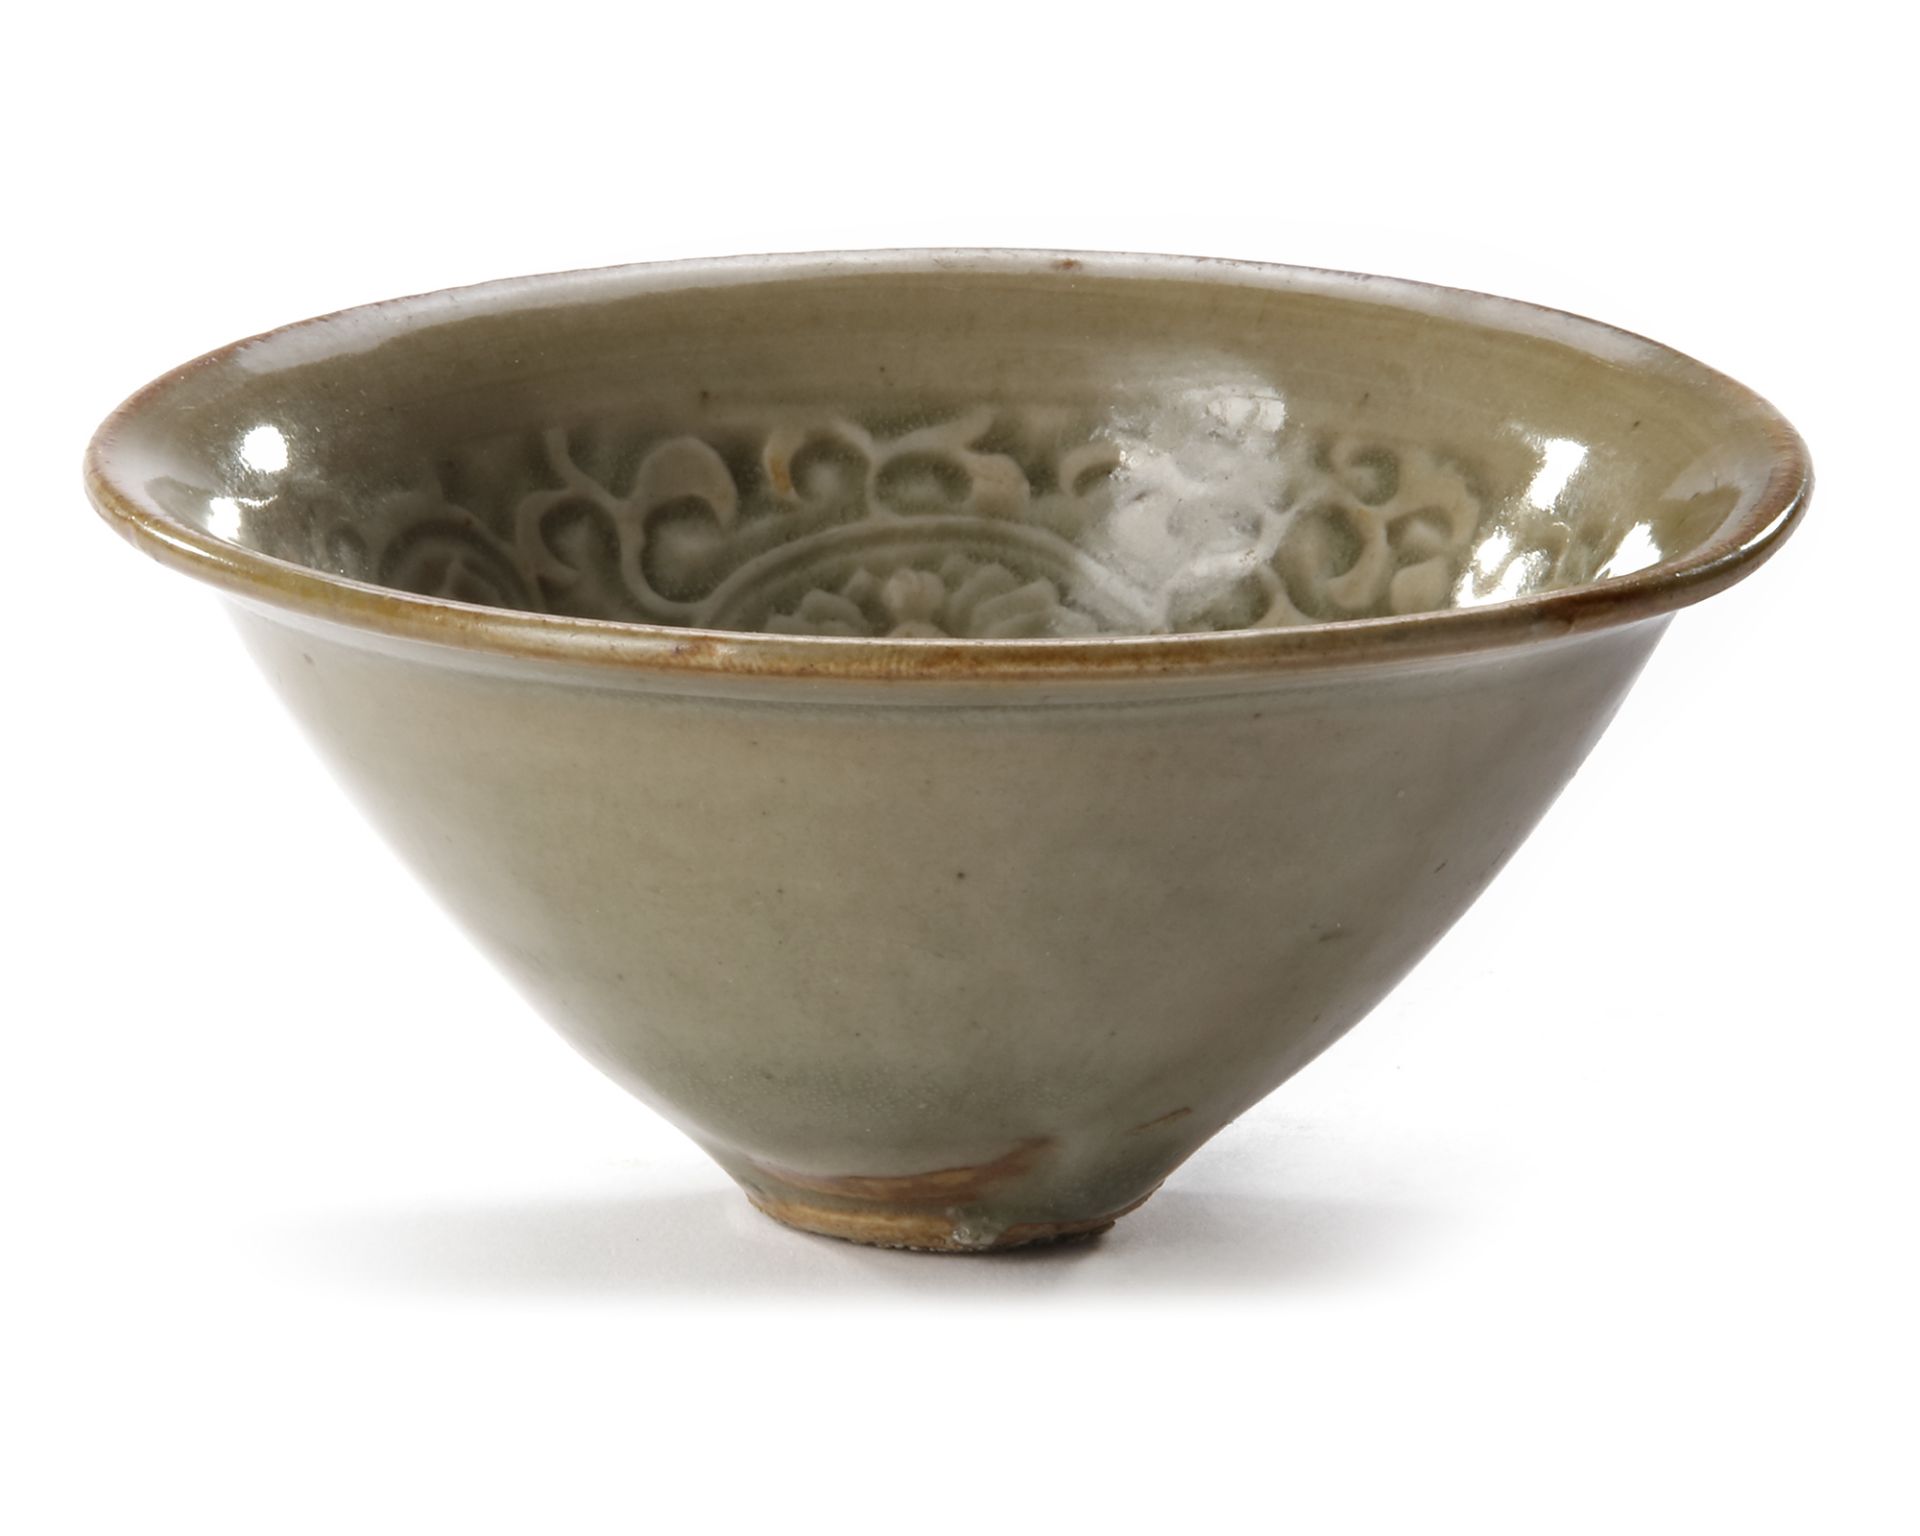 A SMALL CHINESE CELADON BOWL, SONG DYNASTY (960-1127) - Image 3 of 4